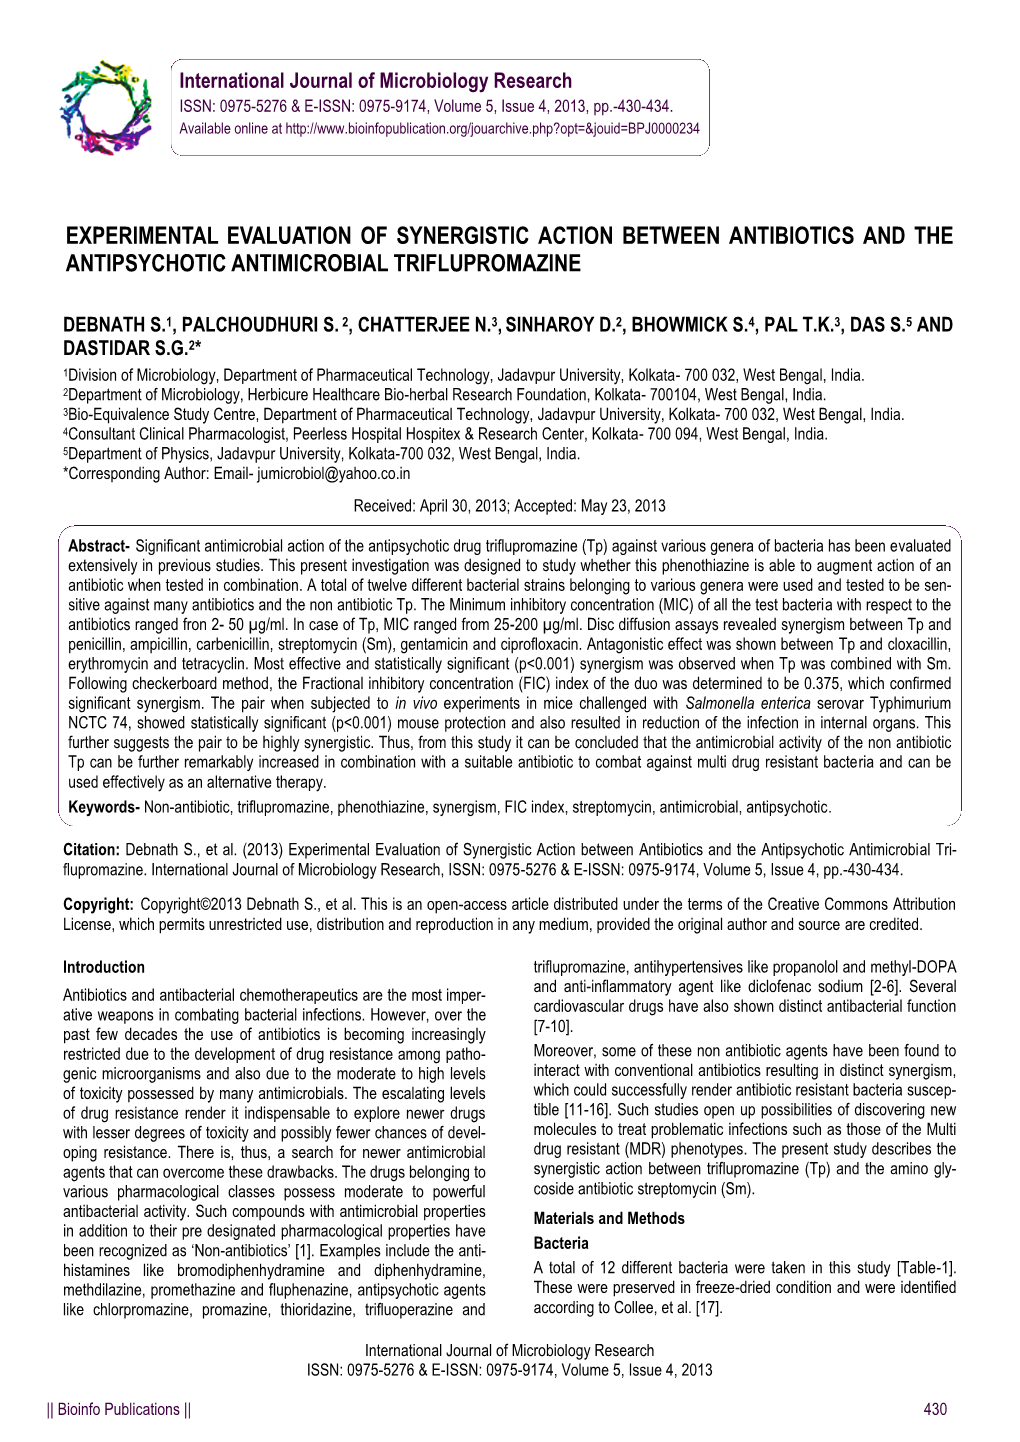 Experimental Evaluation of Synergistic Action Between Antibiotics and the Antipsychotic Antimicrobial Tri-Flupromazine